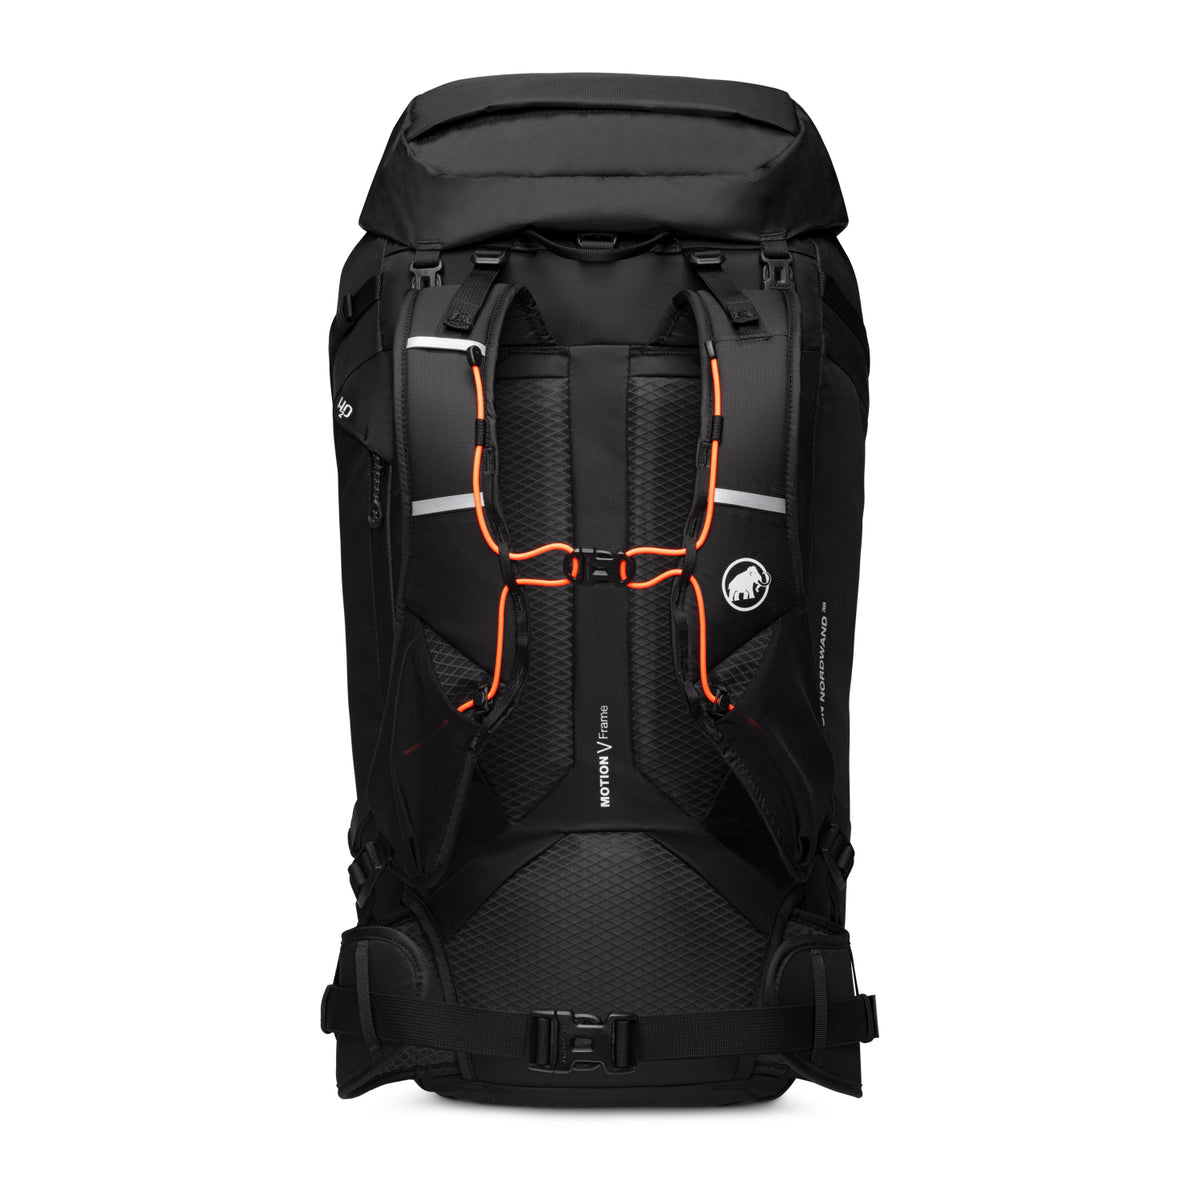 Mammut Trion Nordwand 38 black - back system view showing attachment straps